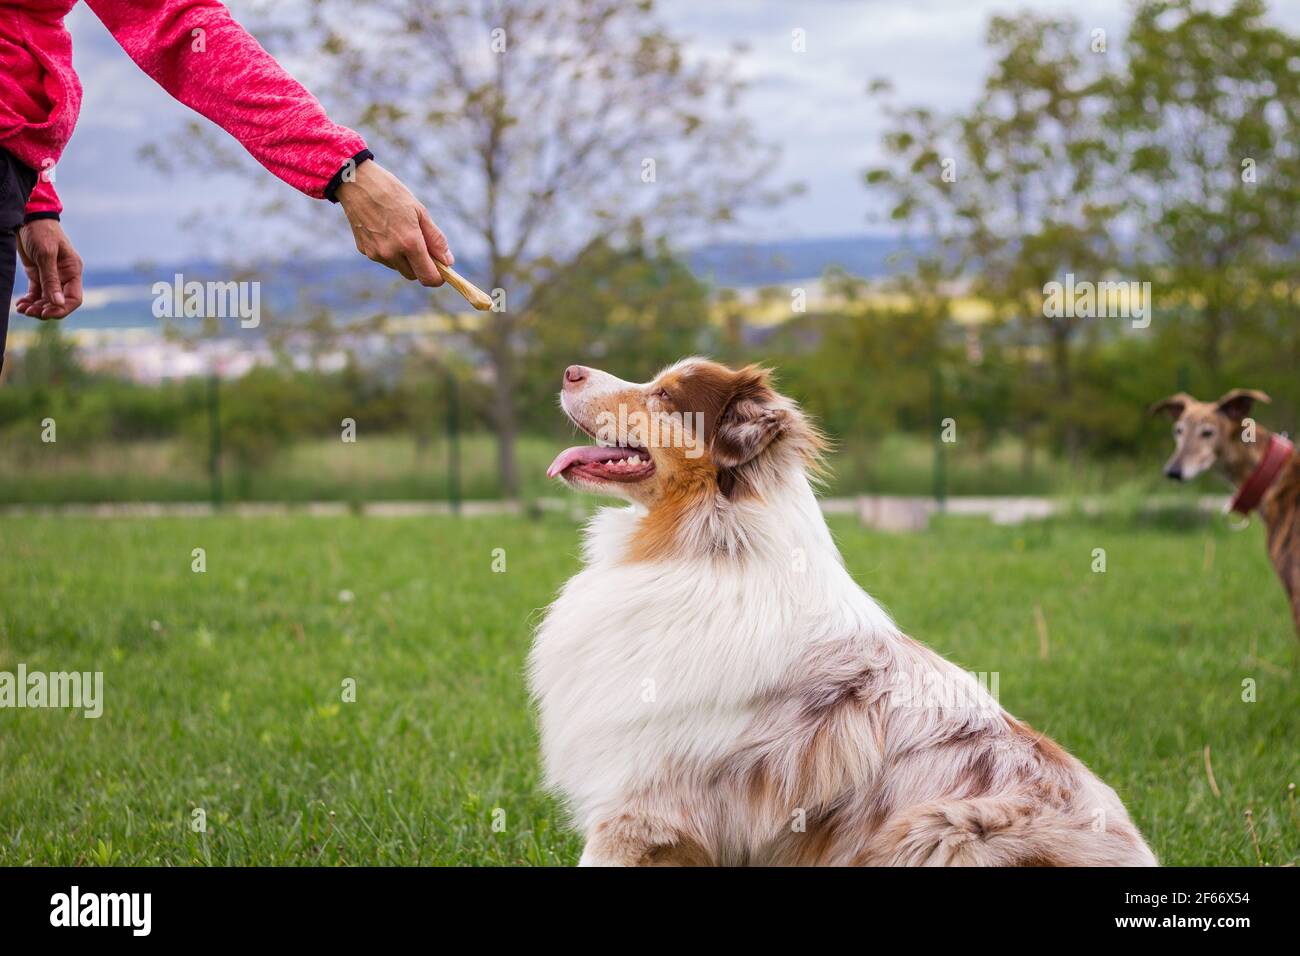 Woman and her dog doing animal obedience training. Cute Australian Shepherd outdoors. Animal trainer giving snack reward to dog after training. Stock Photo